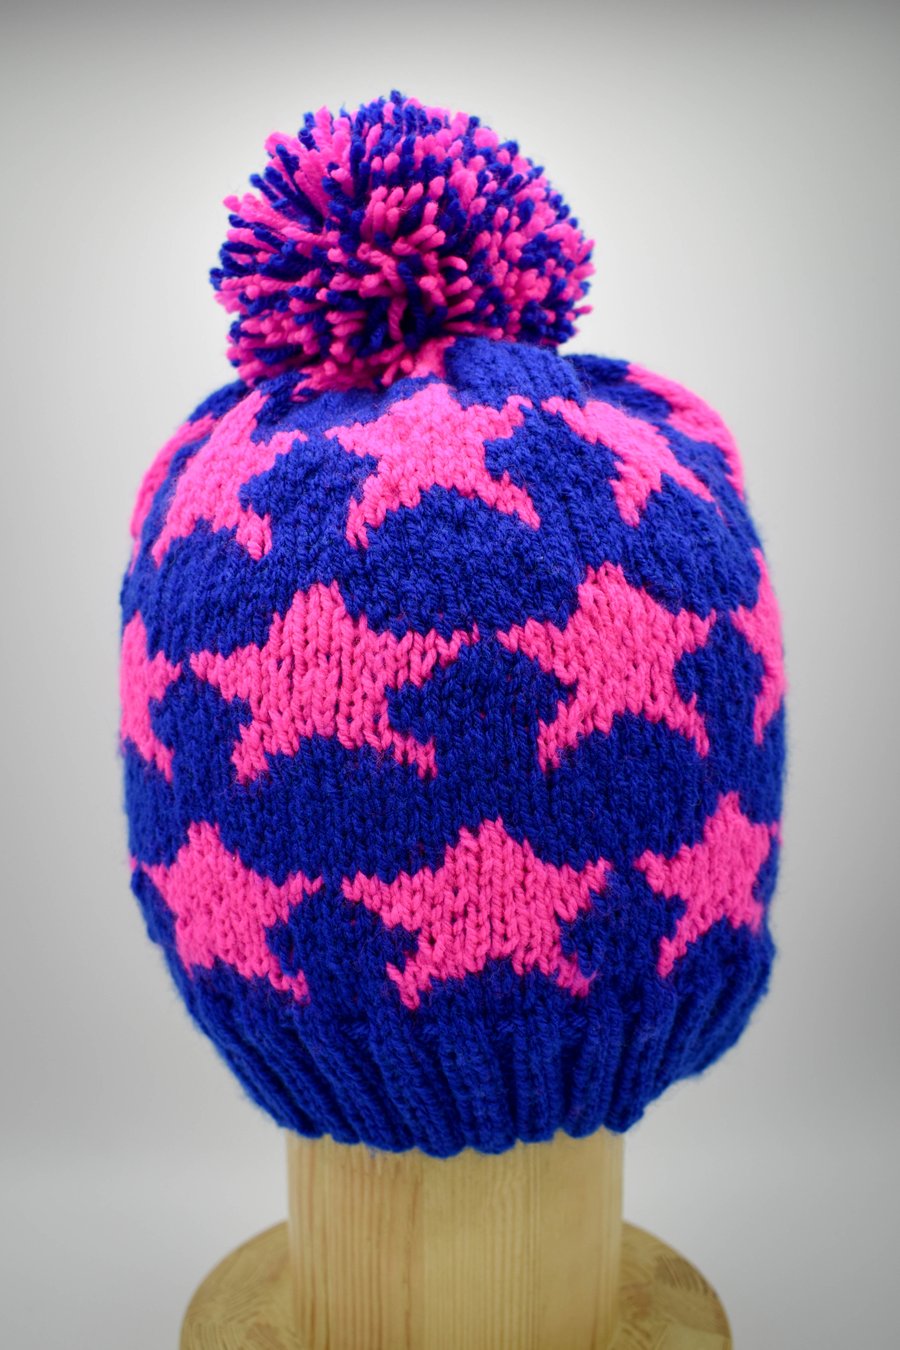 SOLD - SALE - Hand Knitted star design bobble hat in blue and neon pink- Large